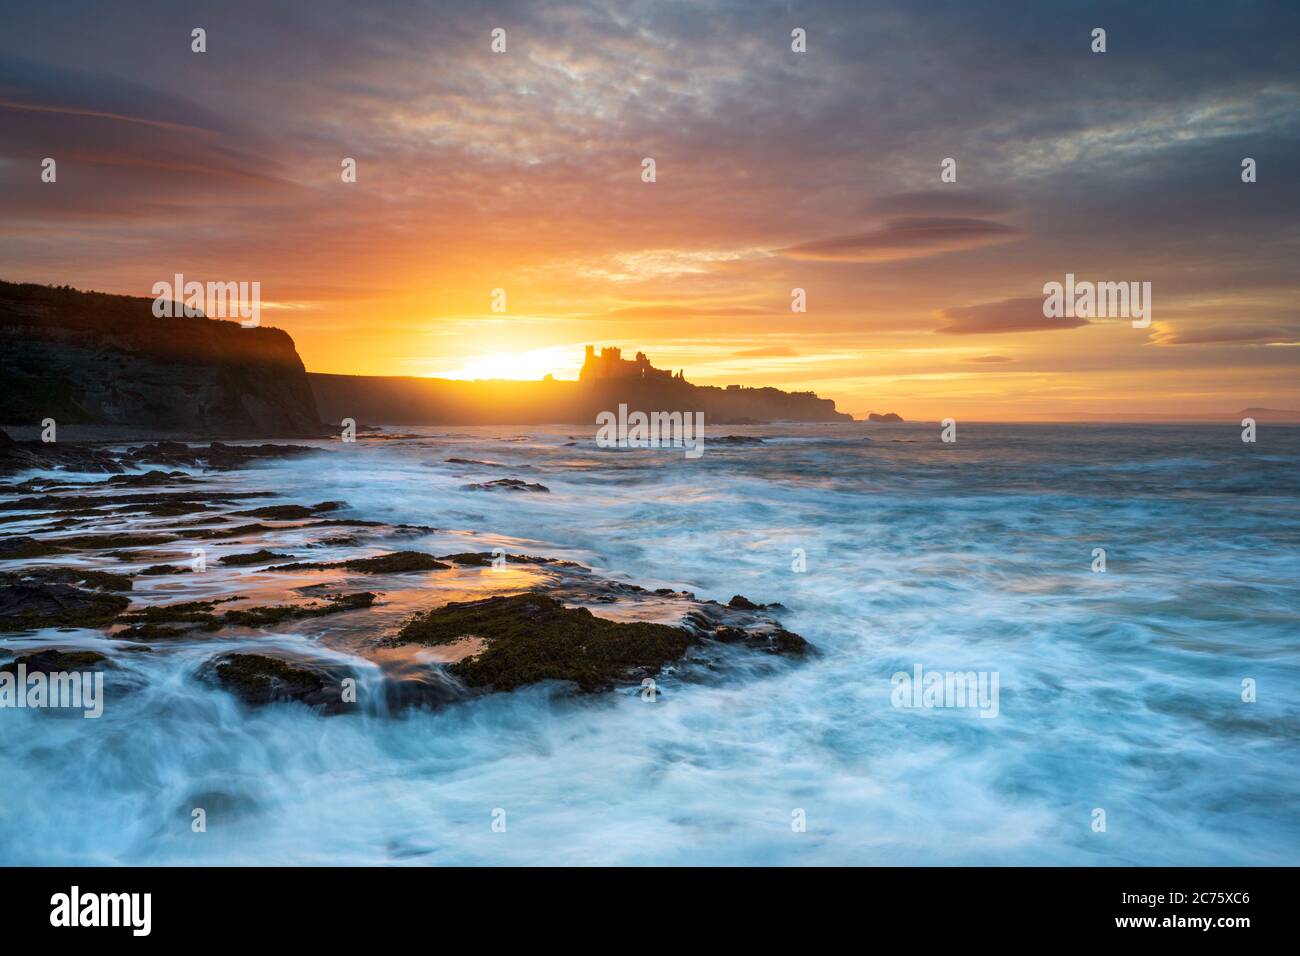 Tantallon Castle is silhouetted by the setting sun on the cliff top above Seacliff Beach, East Lothian, Scotland, as waves crash on the shore below. Stock Photo